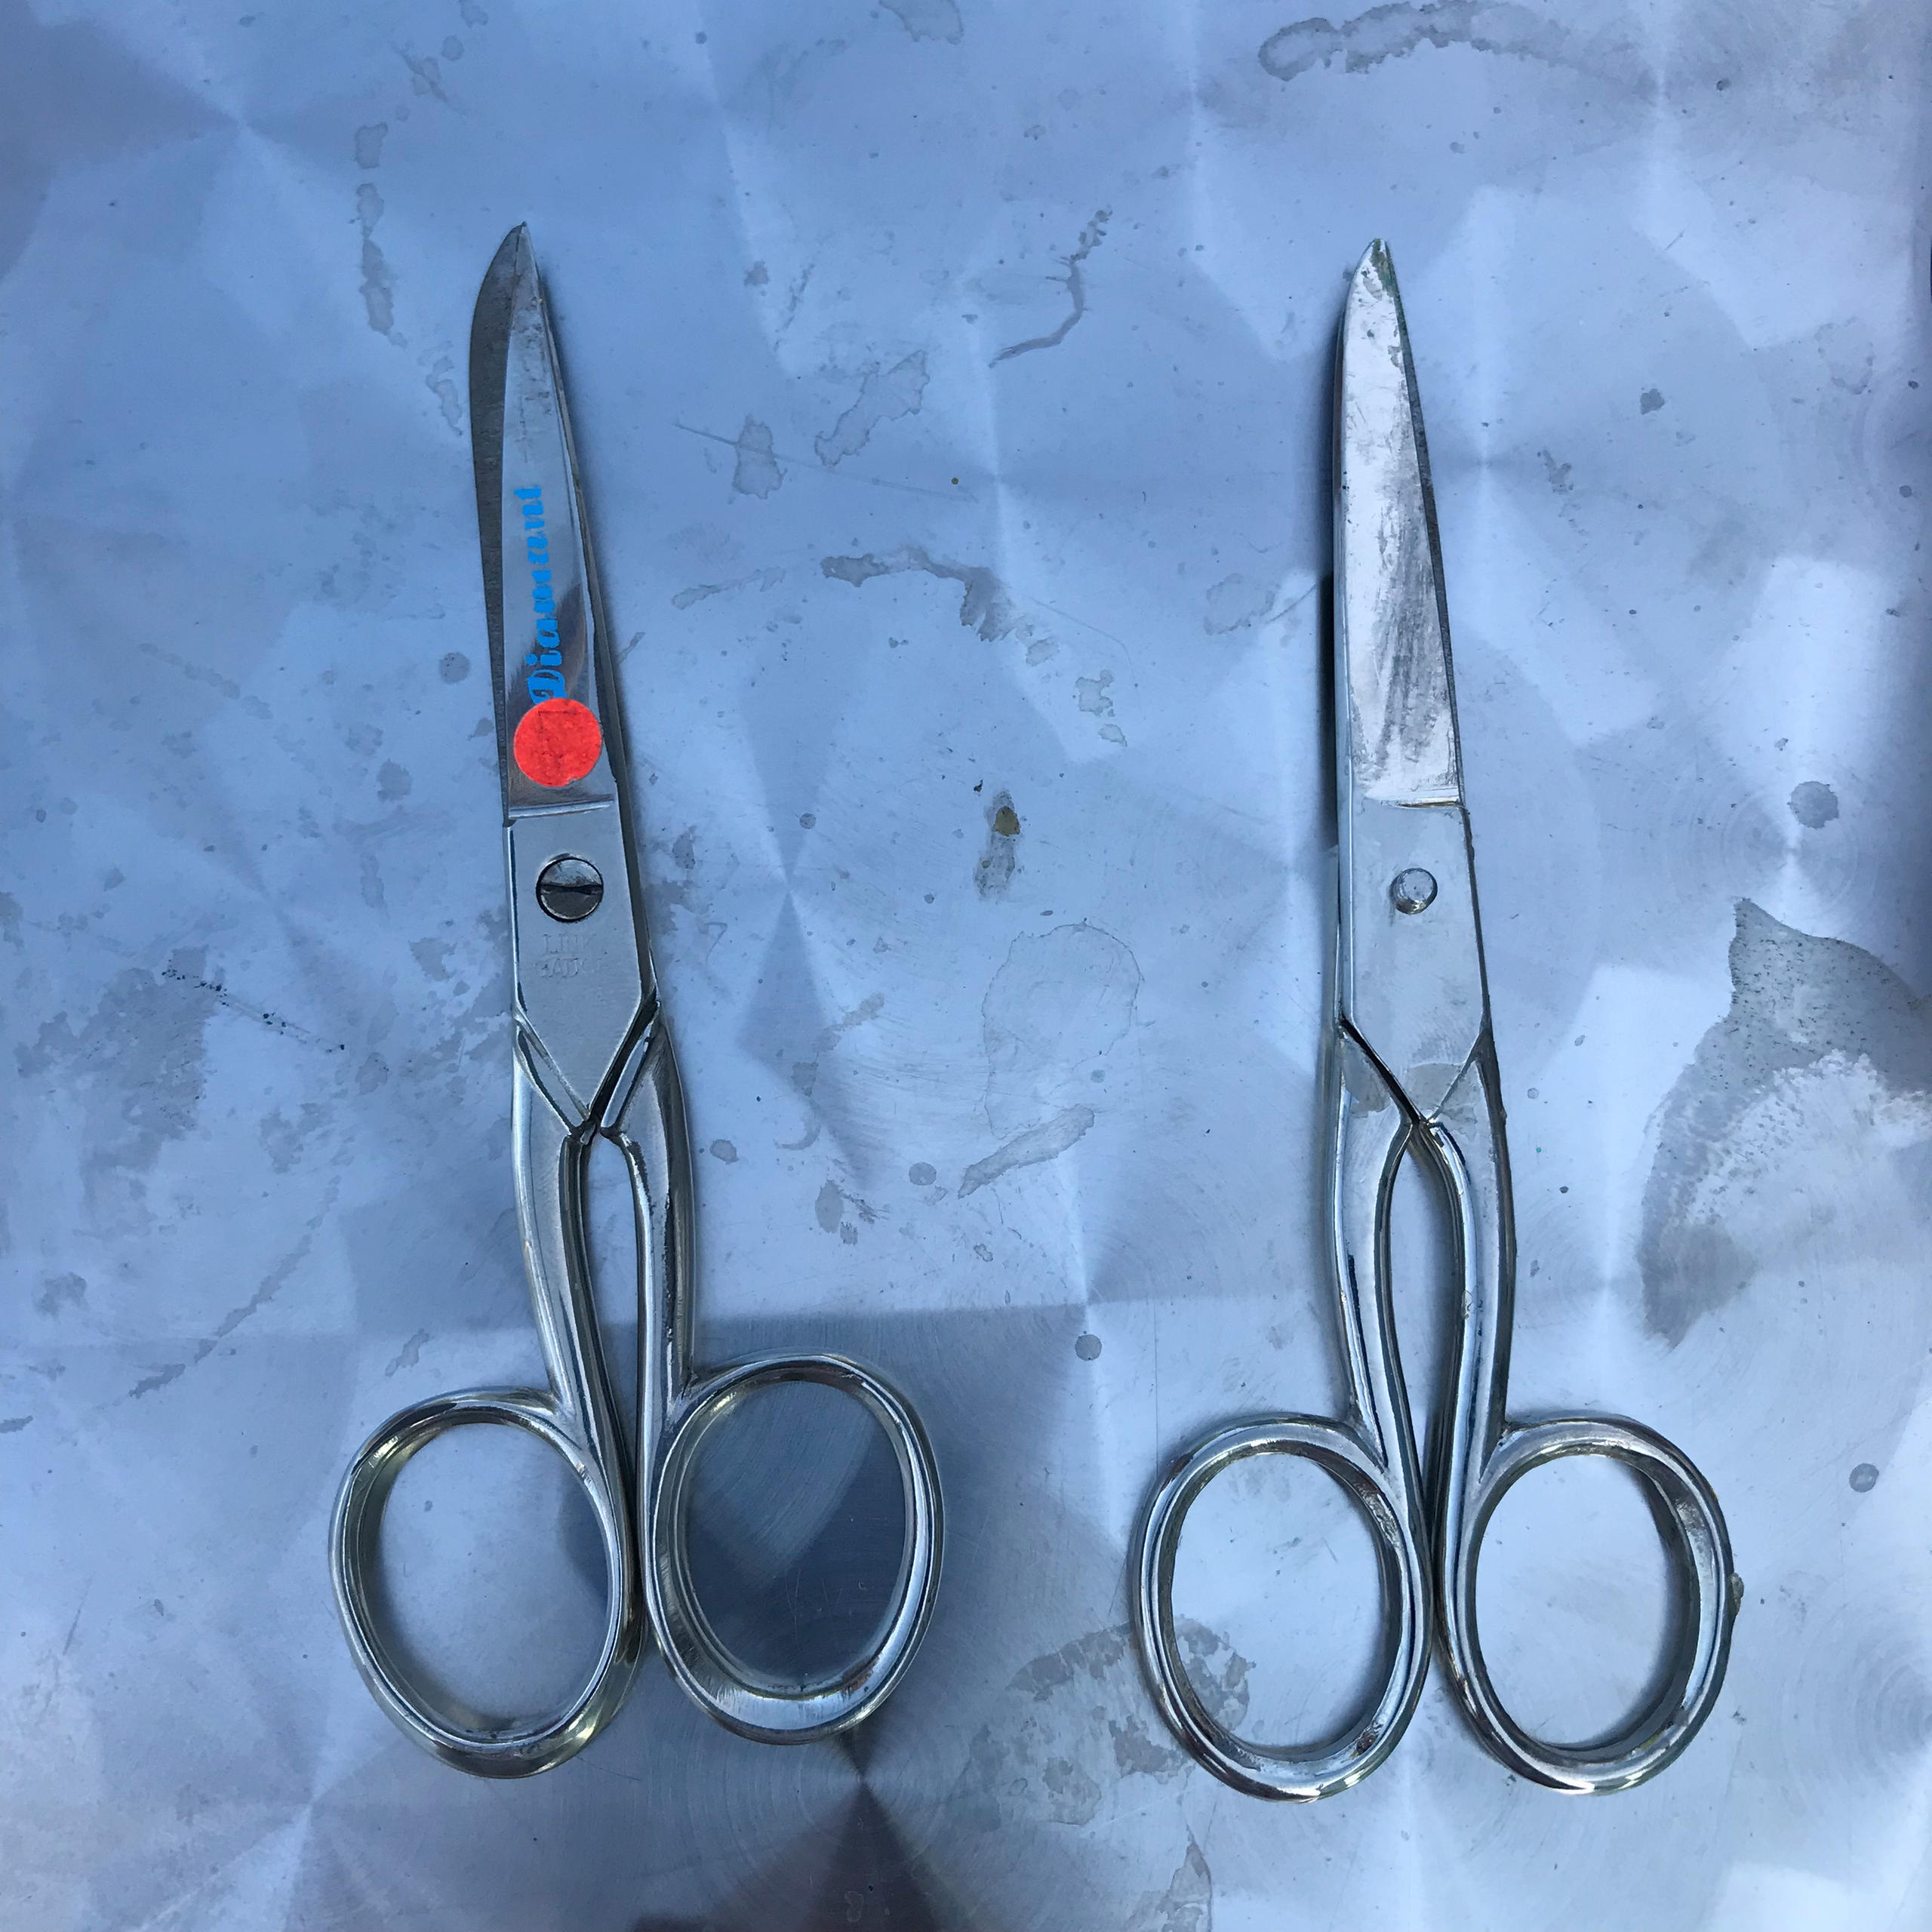 Two pairs of scissors, one marked with red tape